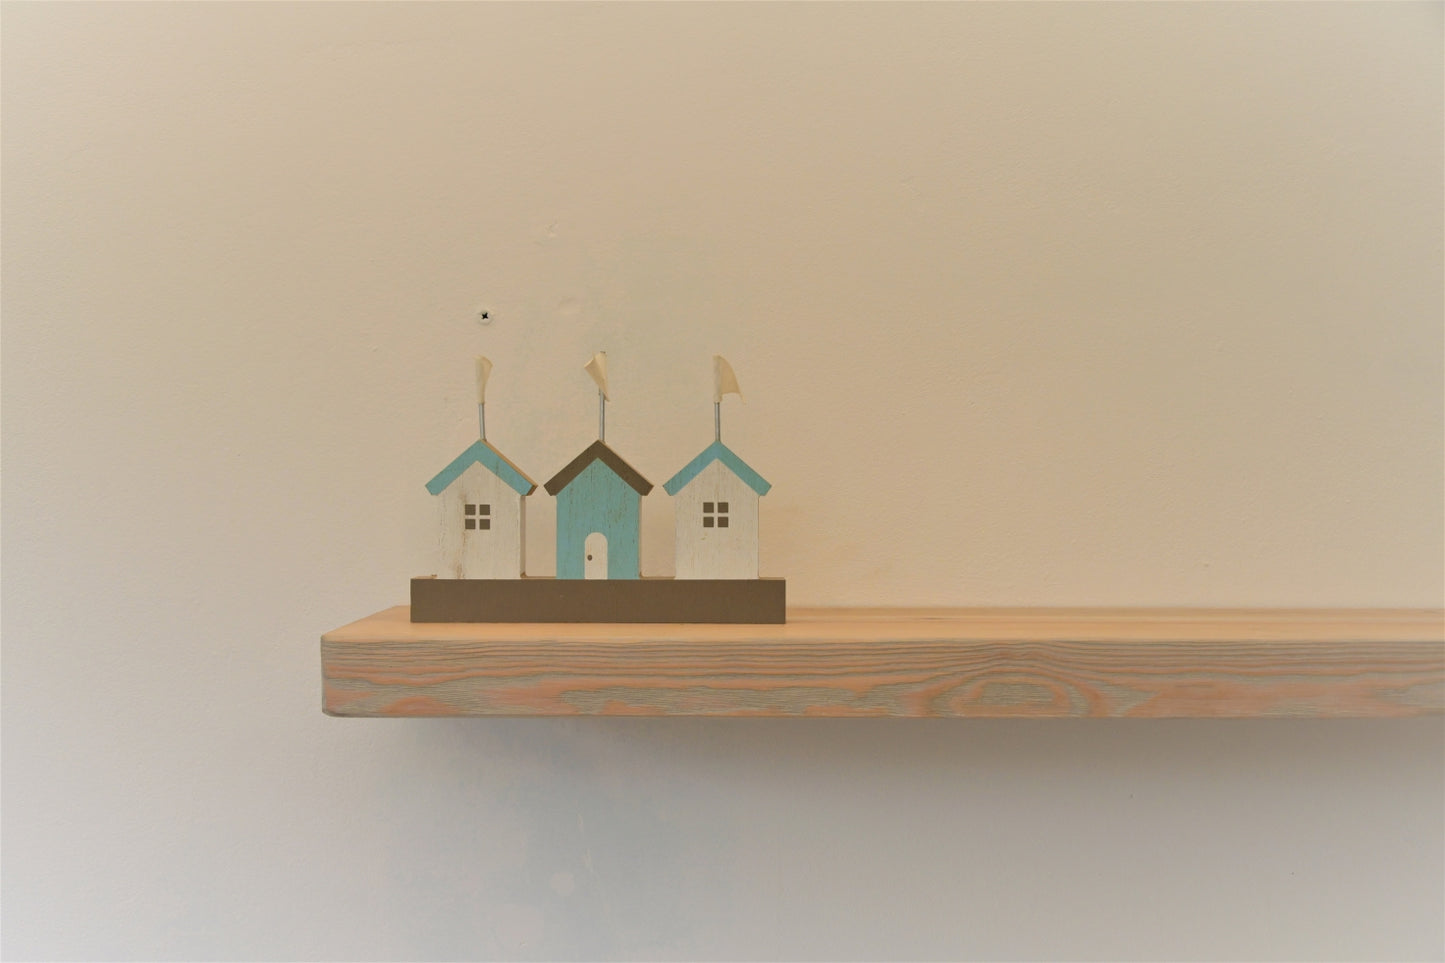 Rustic Wooden Shelving (Beach Weathered)